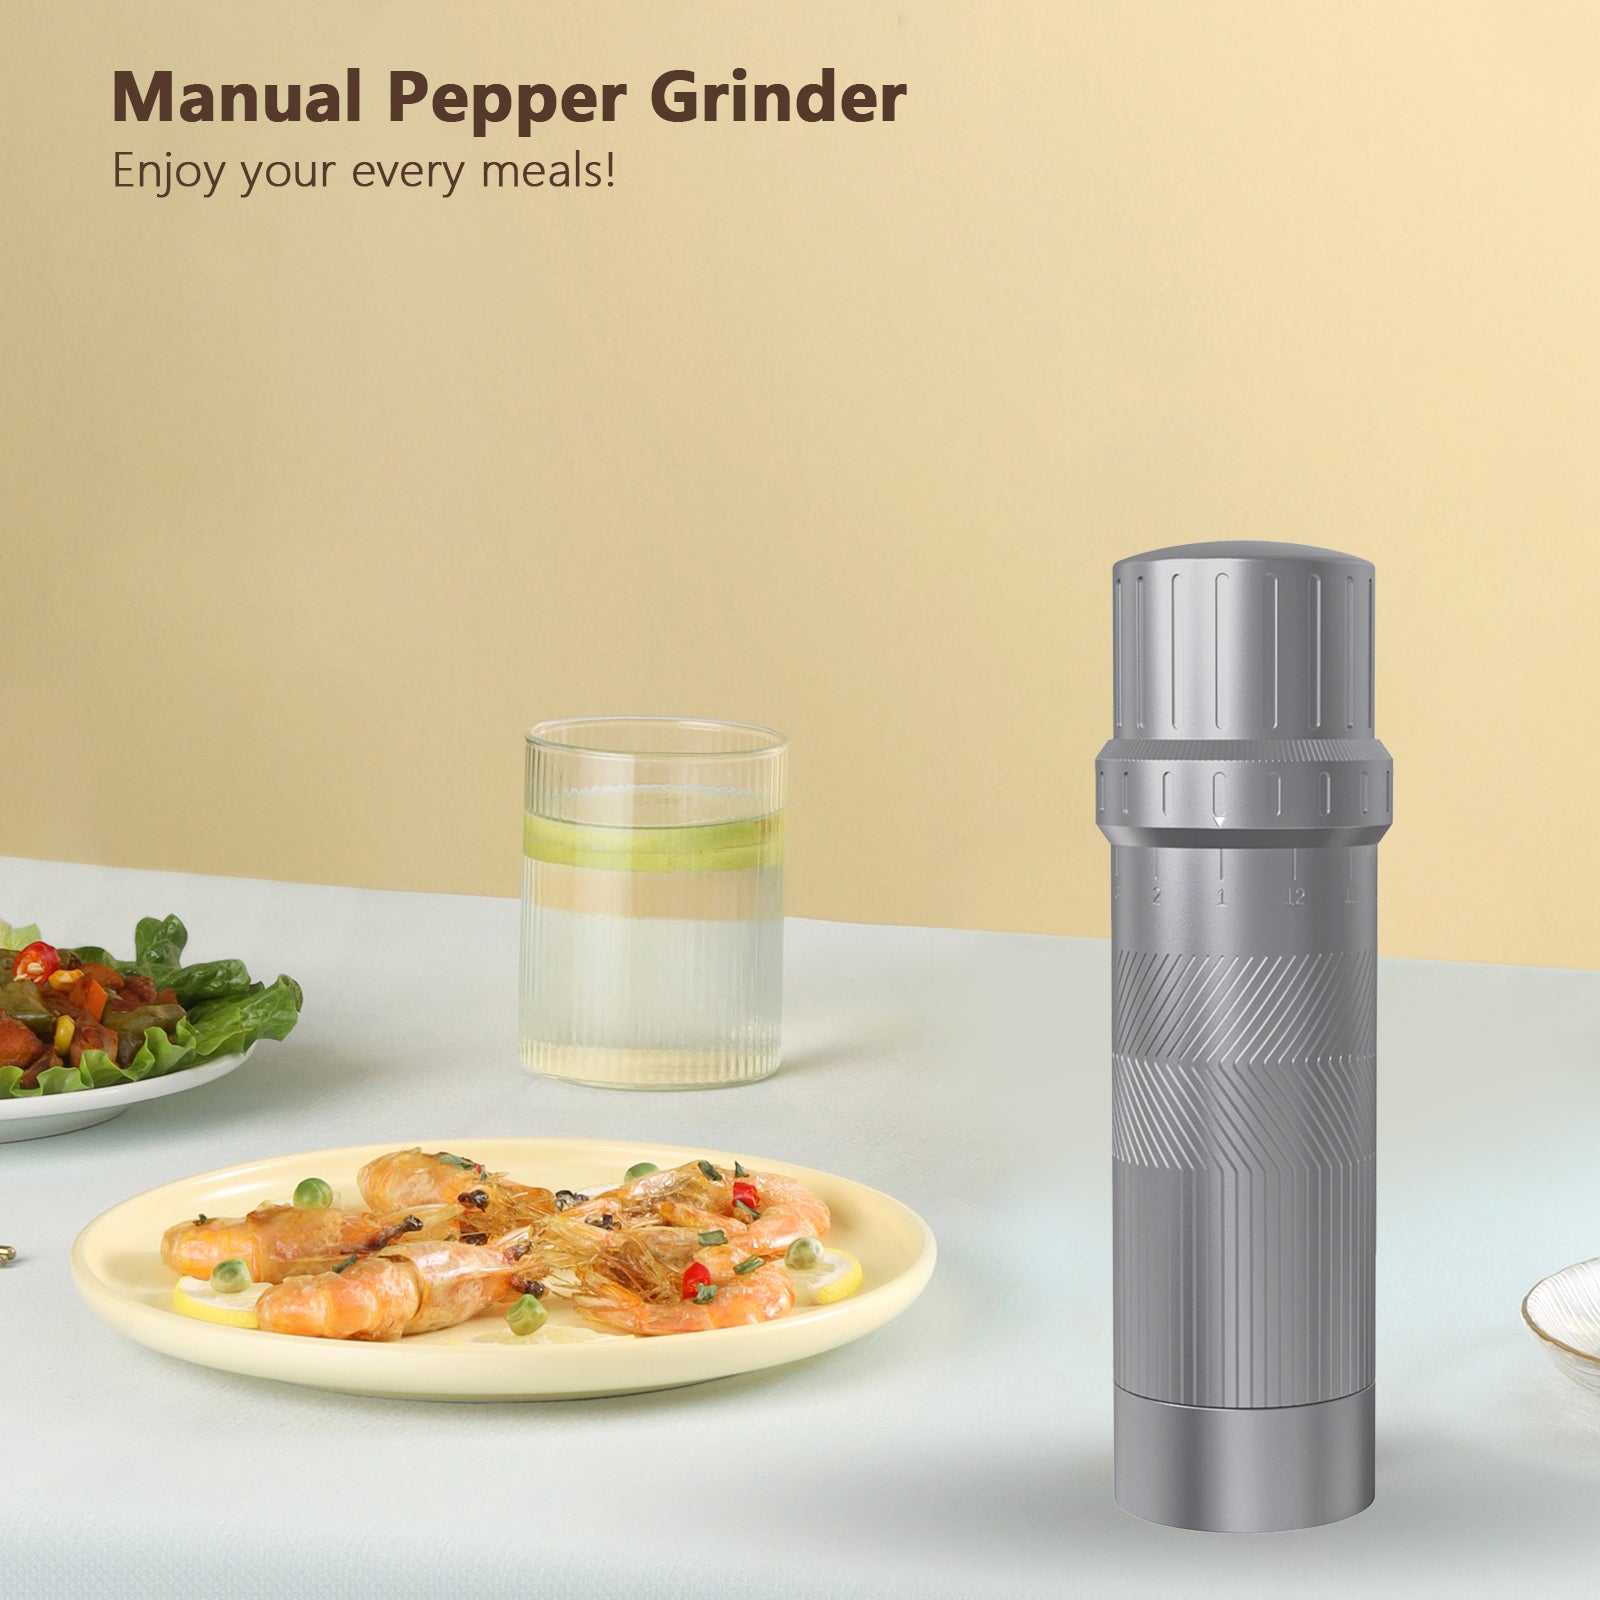  Luvan Pepper Grinder Mill, Heavy Duty Aluminum Manual Pepper  Mill, Professional Grade Pepper Grinder with Stainless Steel Blade and  Adjustable Coarseness, Black Pepper Grinder Refillable Gift Set: Home &  Kitchen